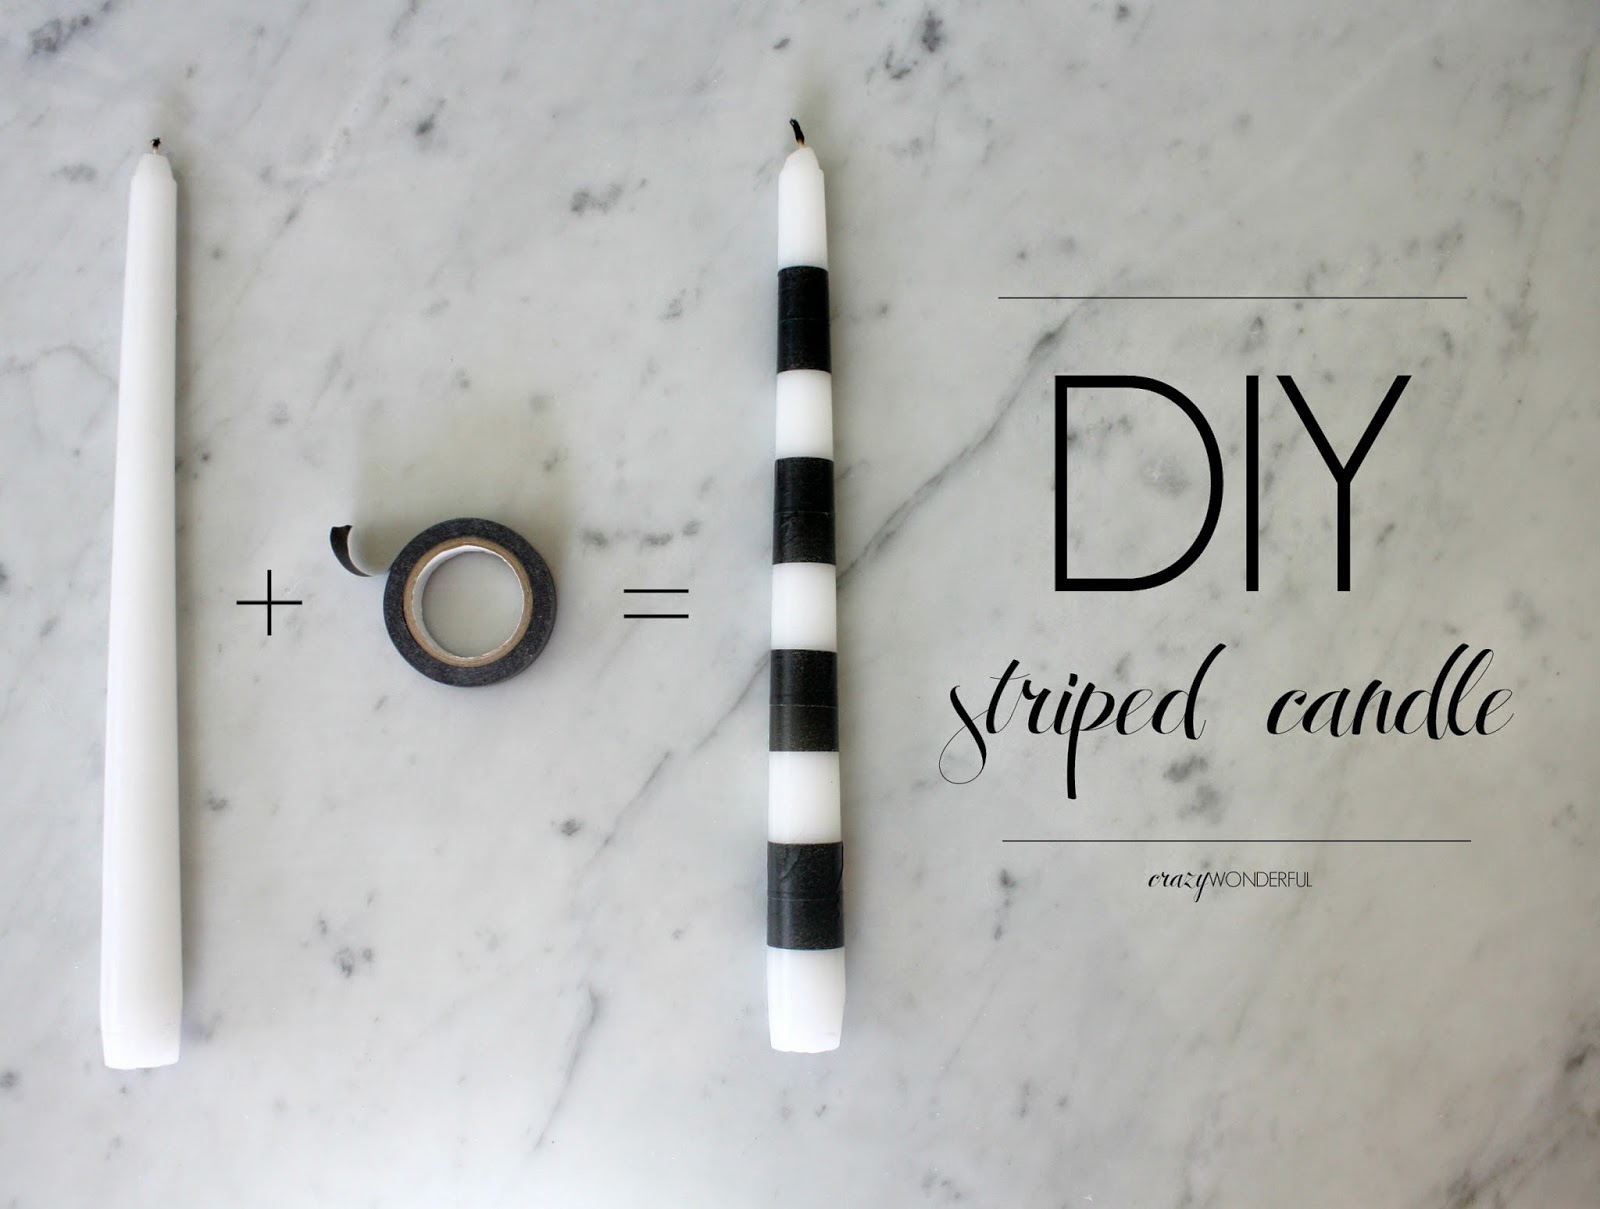 DIY striped candle